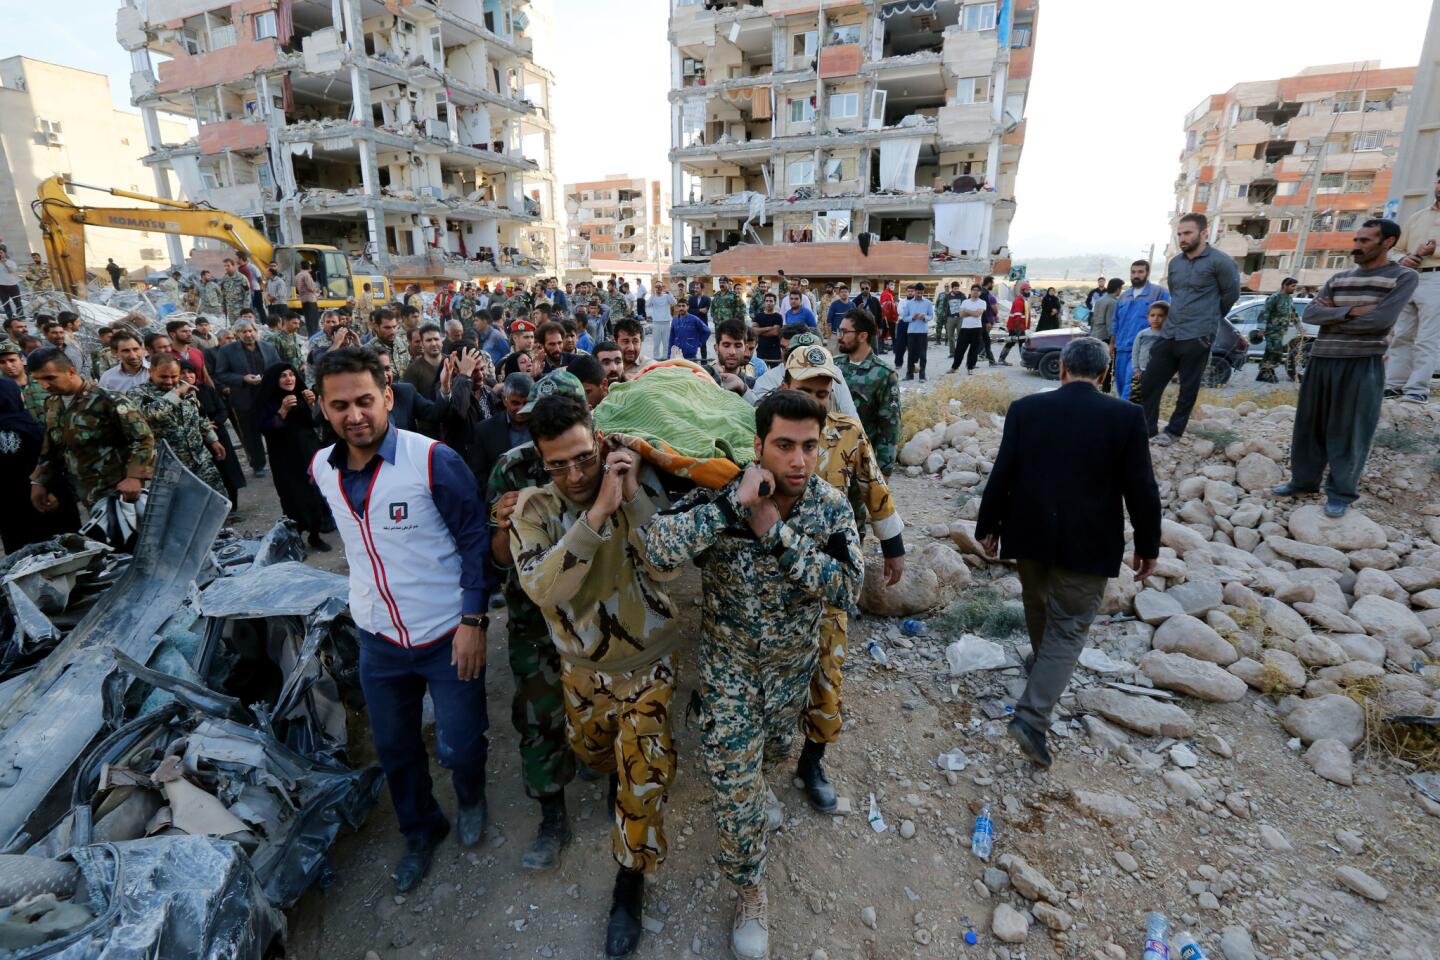 Iranian soldiers carry the body of an earthquake victim near the wreckage of a collapsed building in the city of Pole-Zahab, in Kermanshah province, Iran, on Nov. 13. A 7.2 magnitude earthquake that struck Iran's the province bordering Iraq has killed more than 328 people and left at least 3,950 injured, Iranian authorities said.